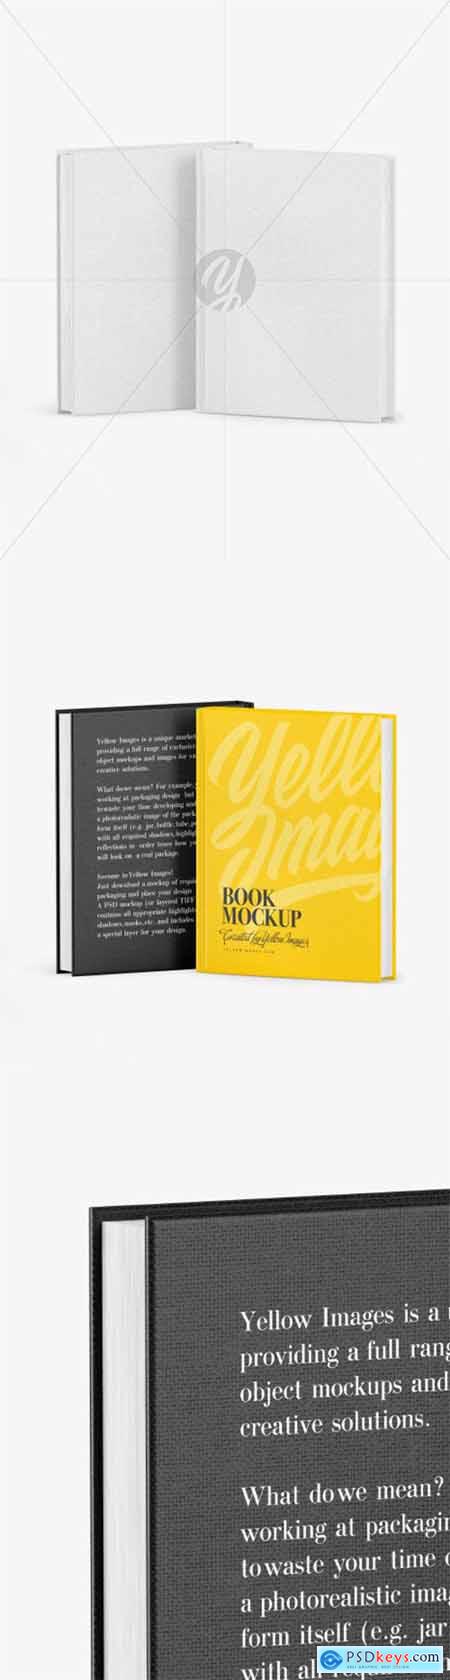 Two Hardcover Books w- Fabric Covers Mockup 80361